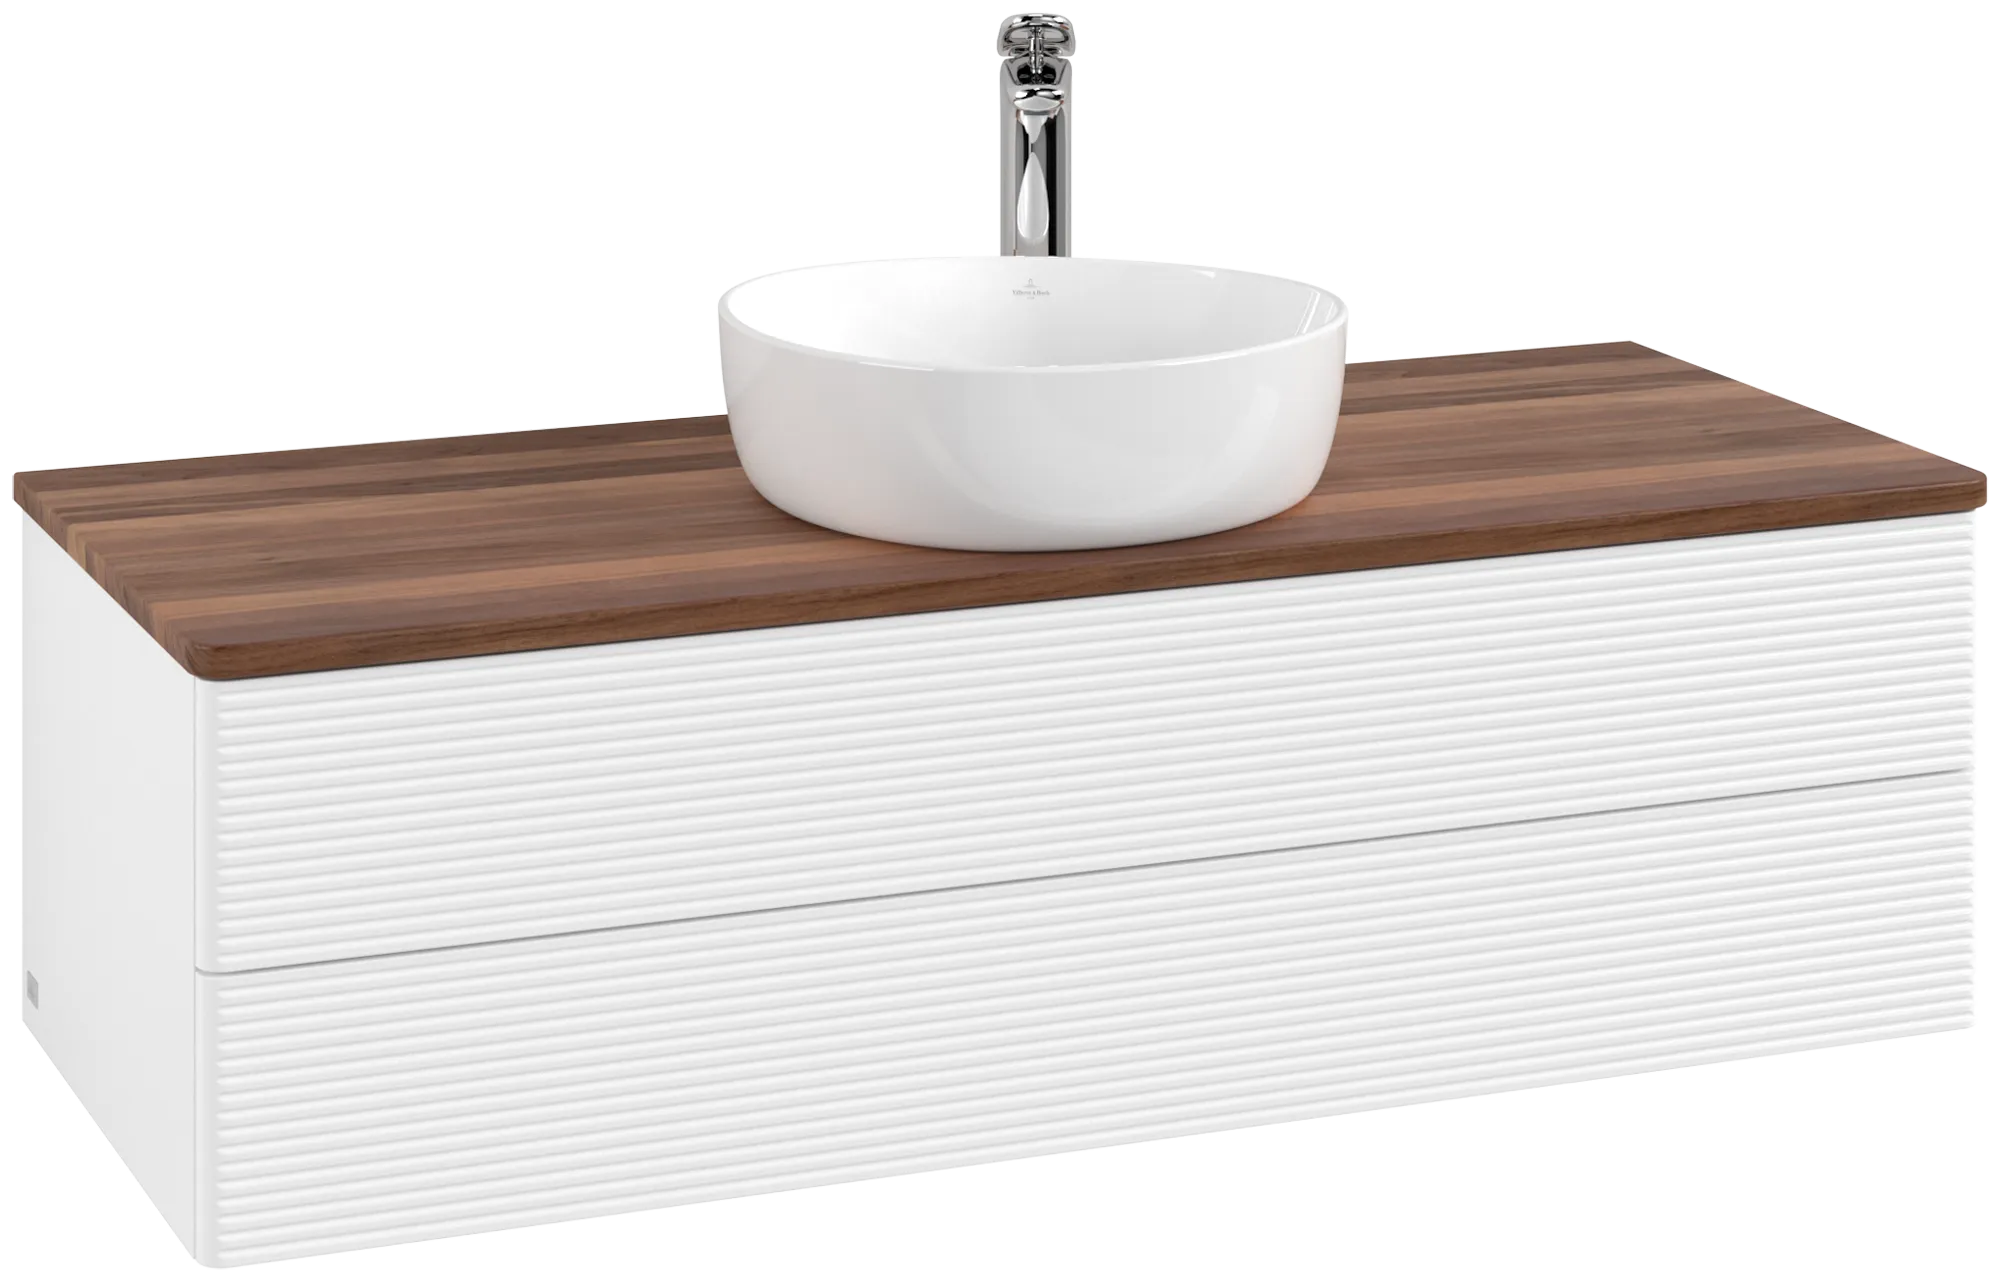 Picture of VILLEROY BOCH Antao Vanity unit, 2 pull-out compartments, 1200 x 360 x 500 mm, Front with grain texture, White Matt Lacquer / Warm Walnut #K21152MT